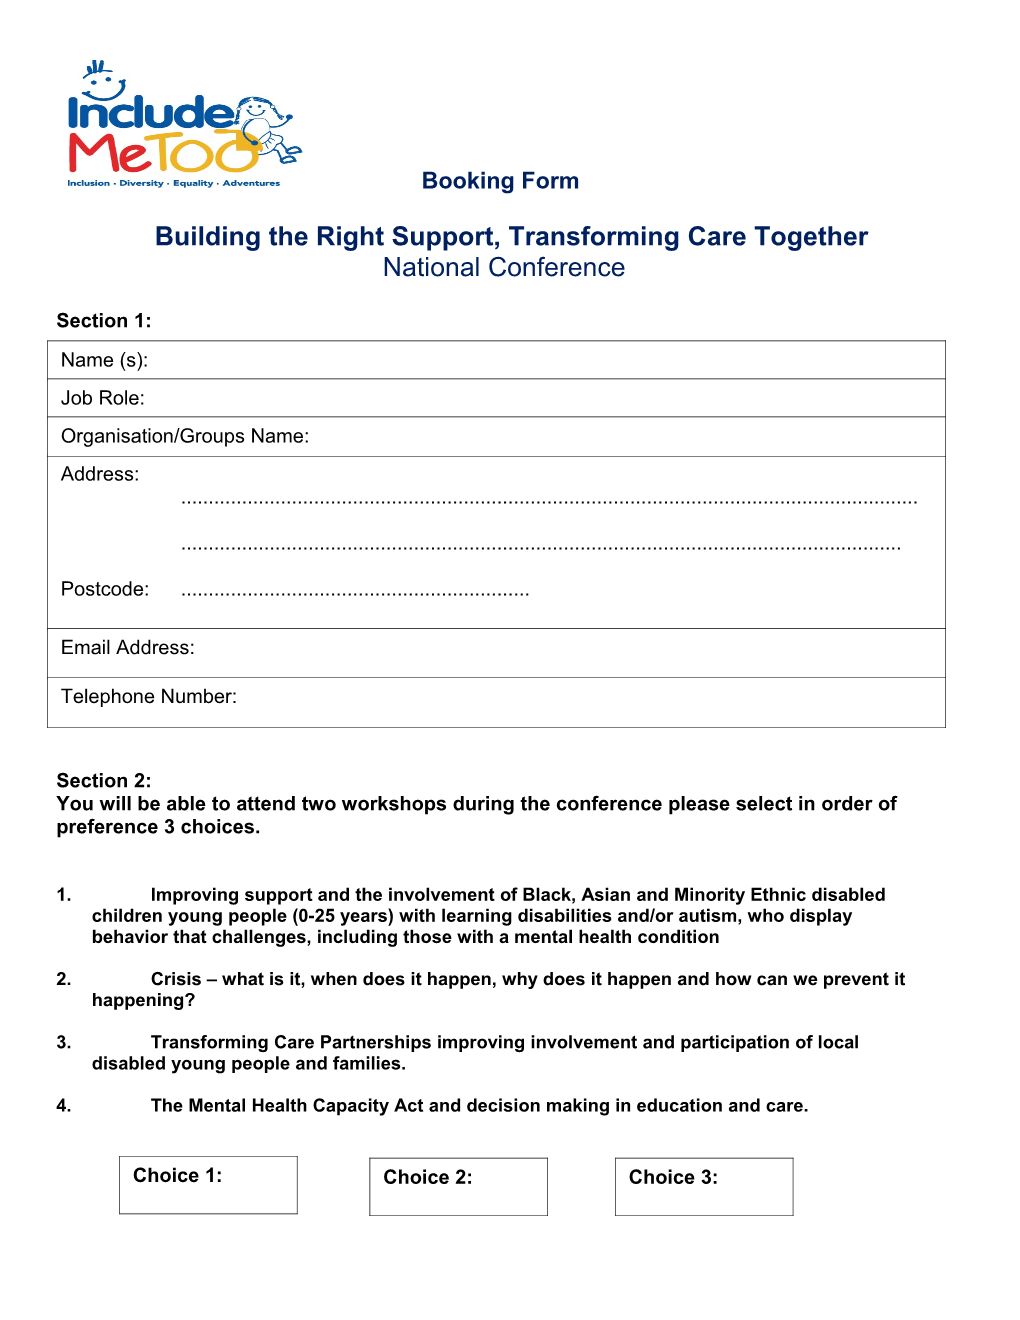 Building the Right Support, Transforming Care Together National Conference